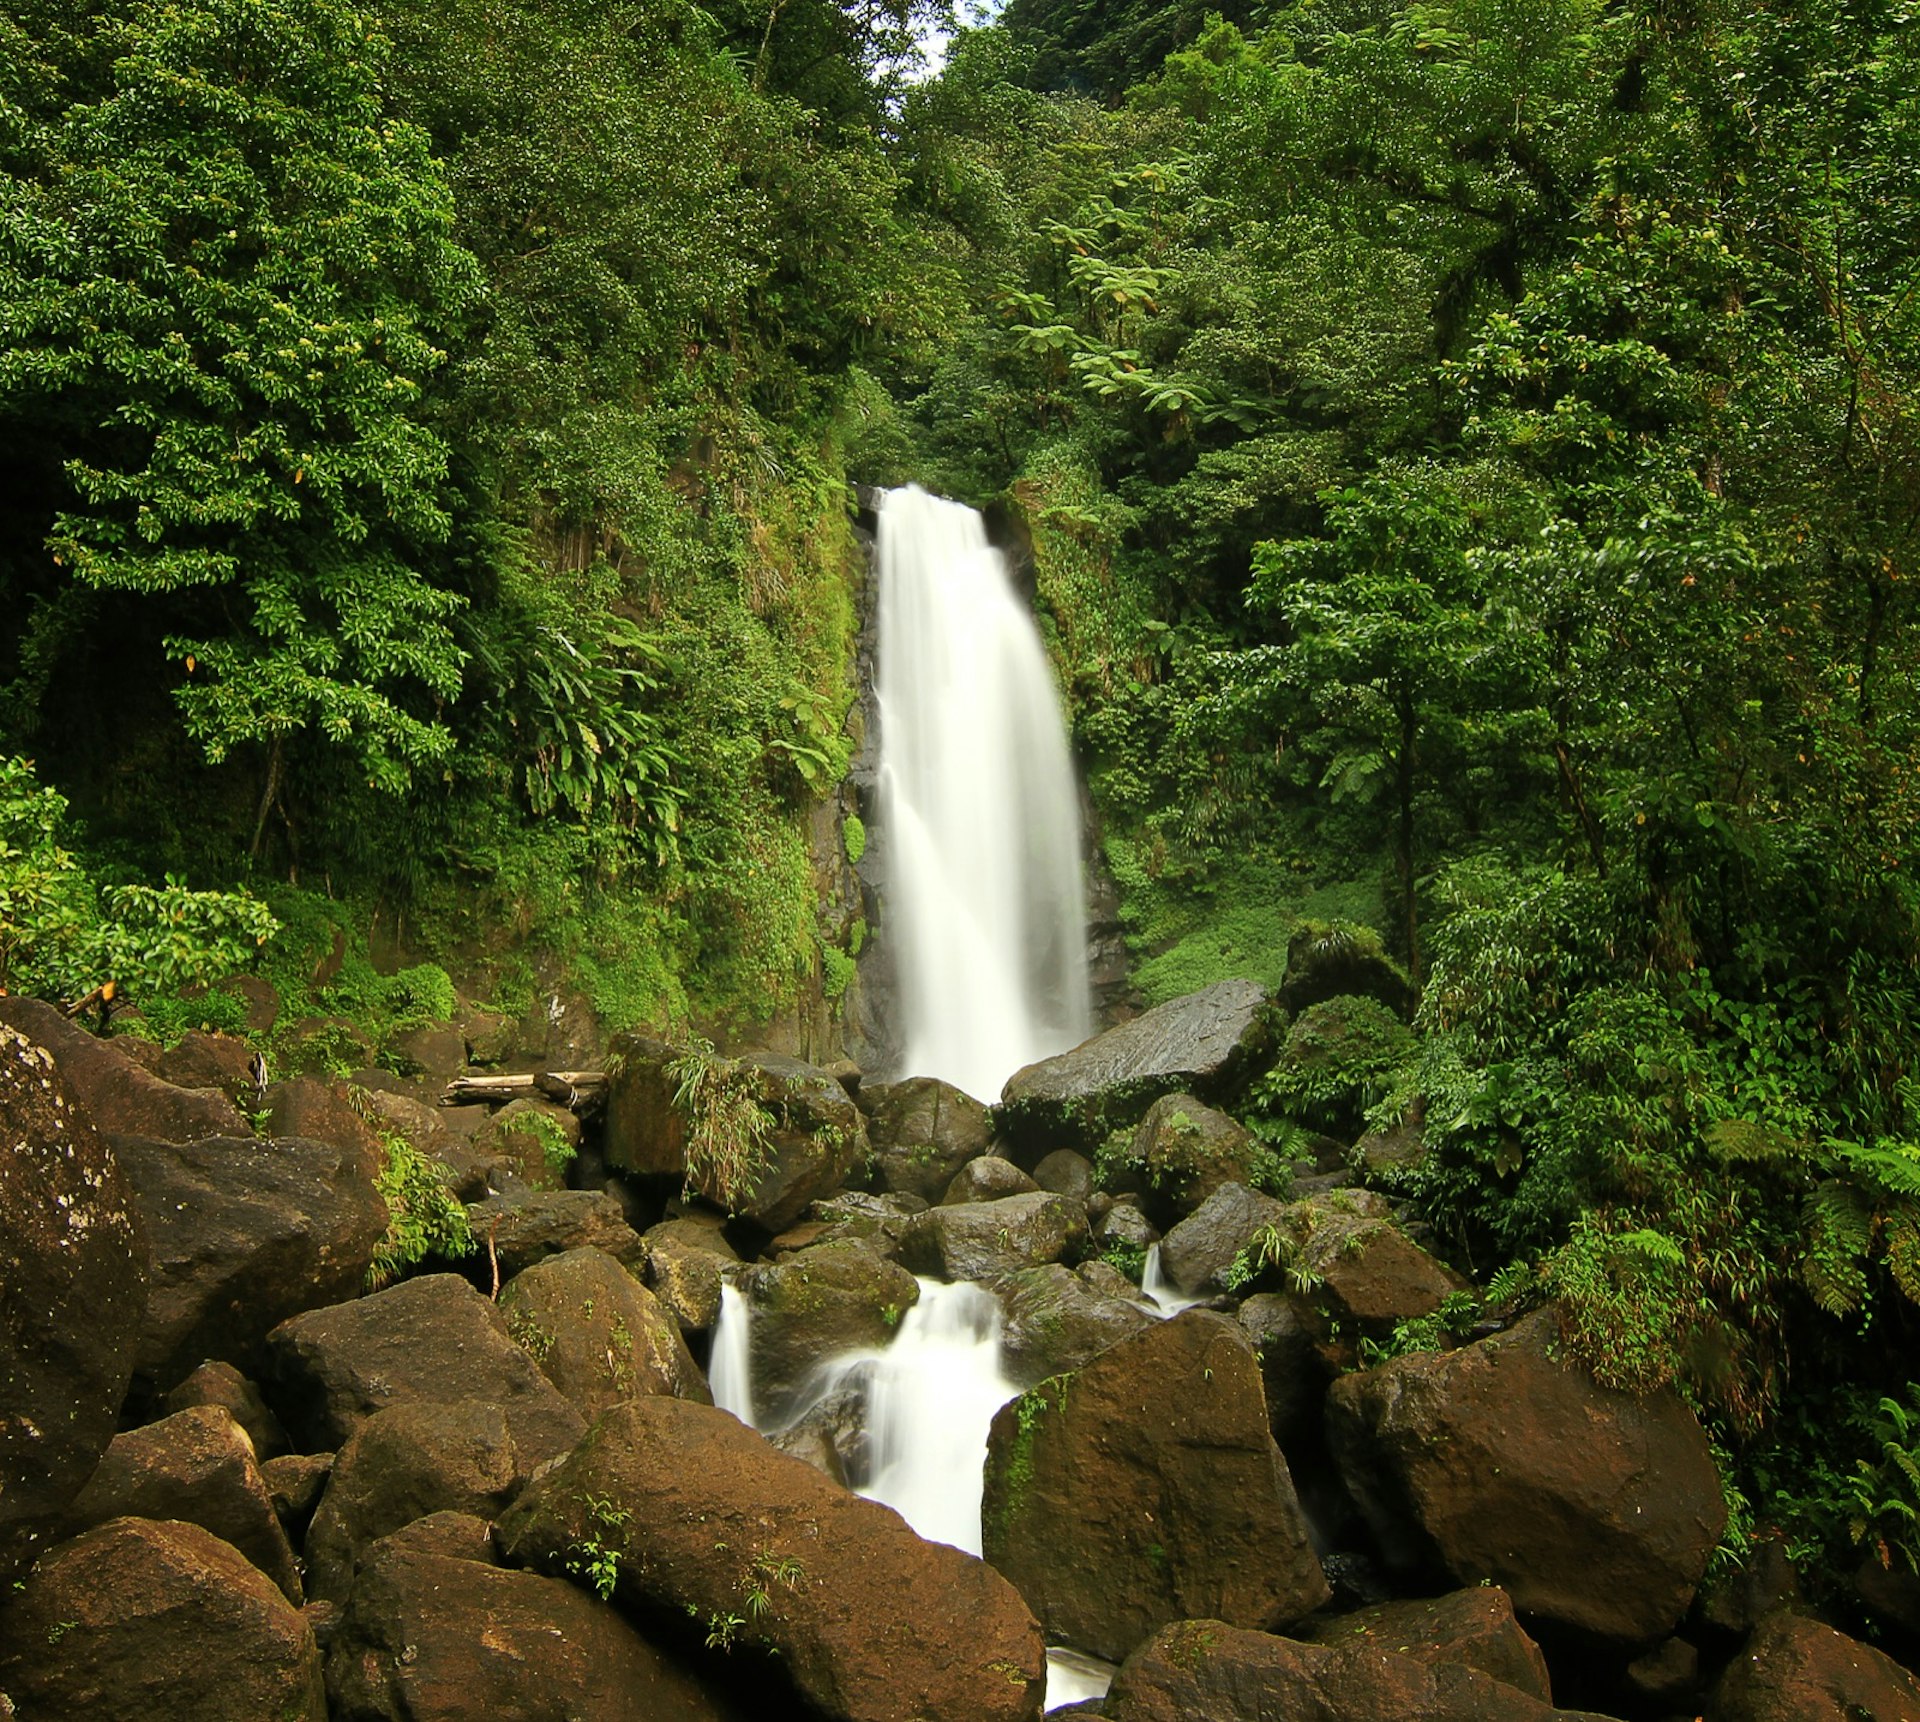 One of the twin waterfalls found at the end of the Trafalgar Falls hike in Dominica Tadas Jucys / 500 Pixels